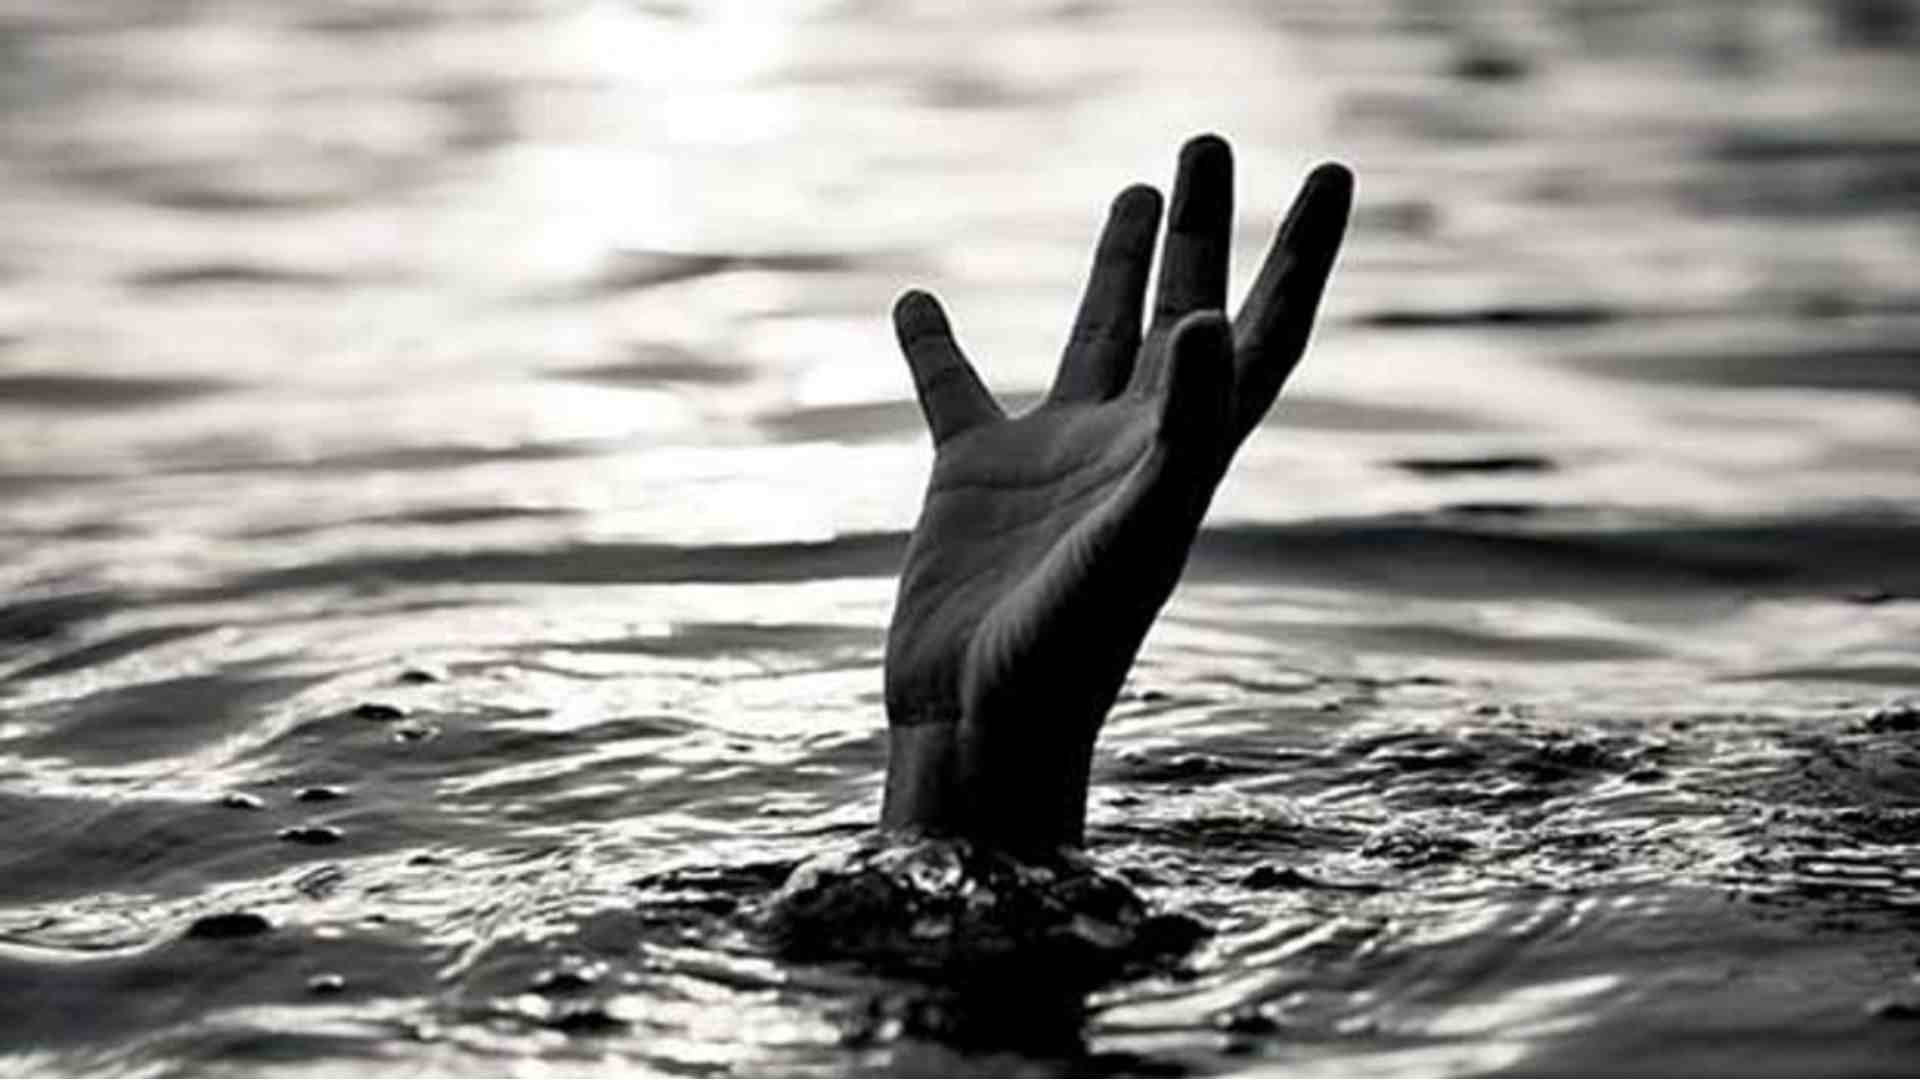 Four Indian Medical Students Tragically Drown In A River Near St. Petersburg, Russia